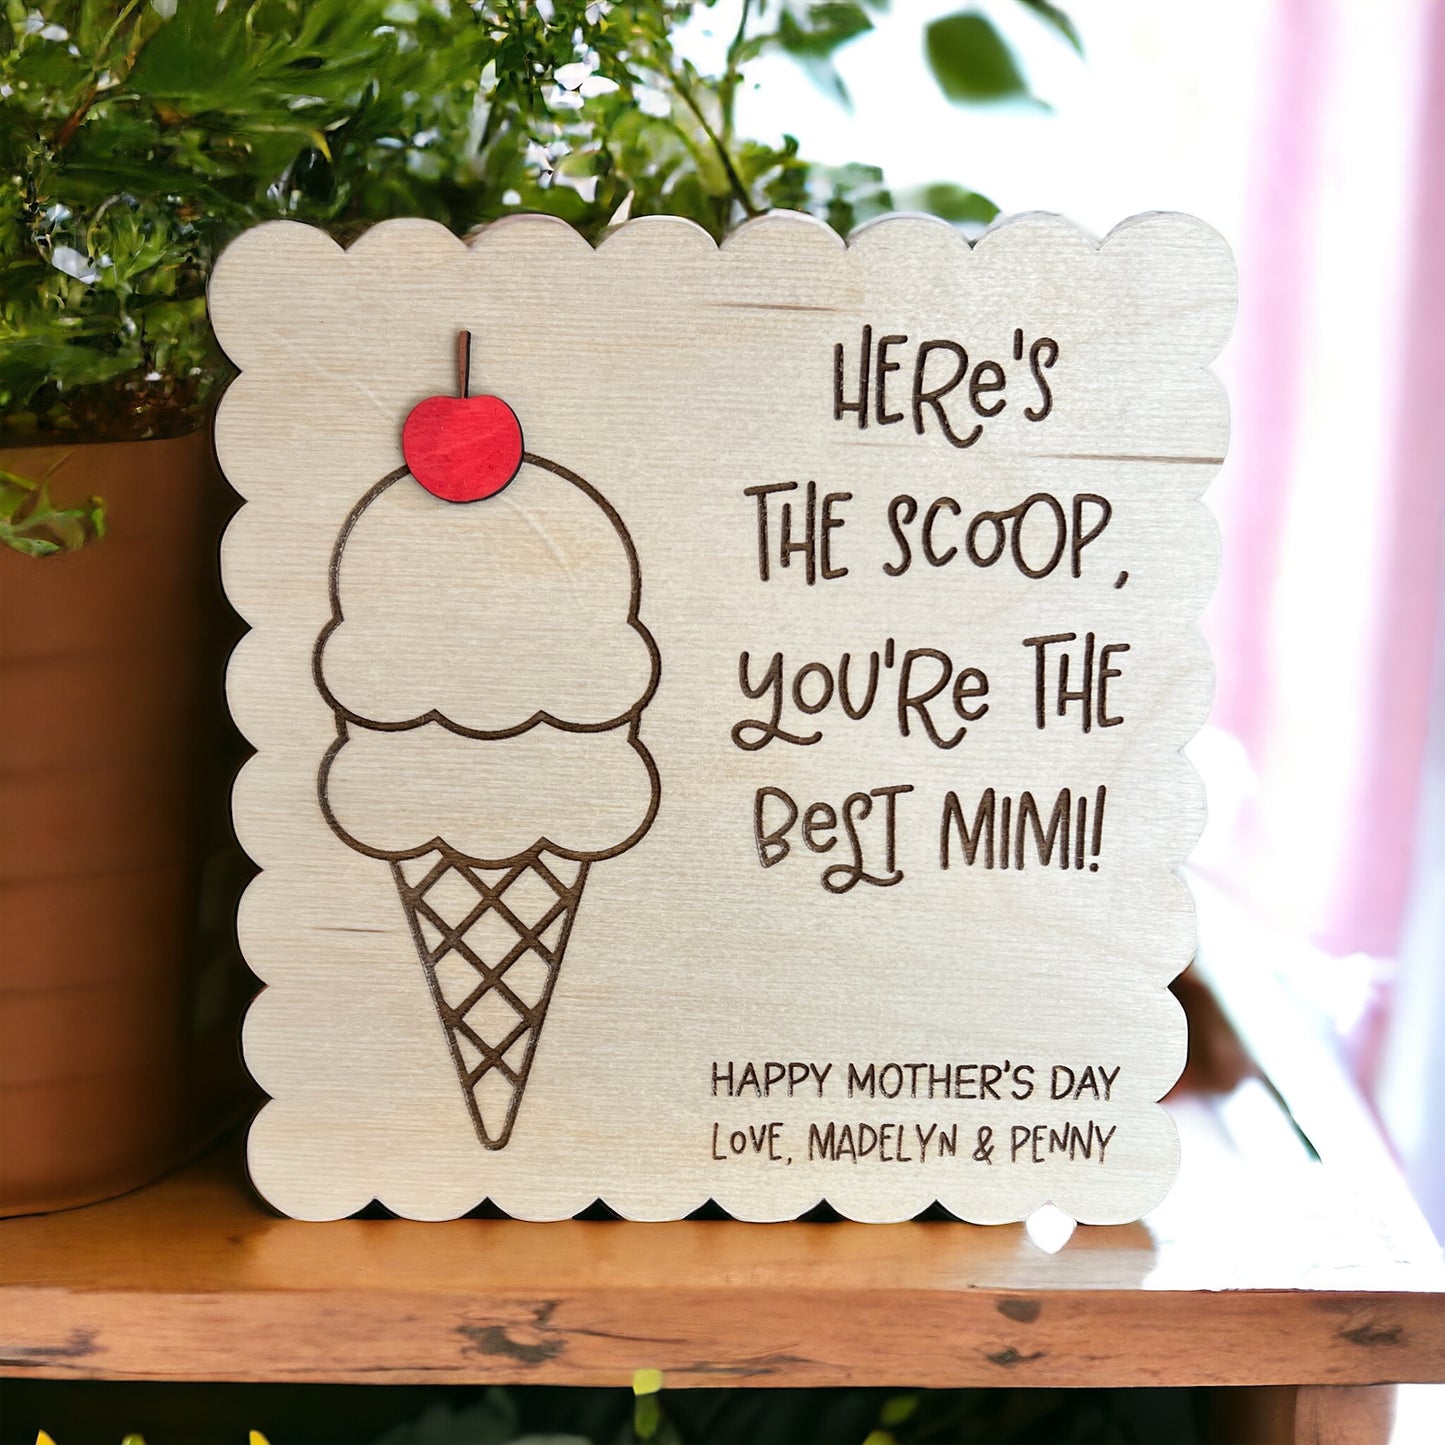 Here’s the scoop Mother’s Day sign